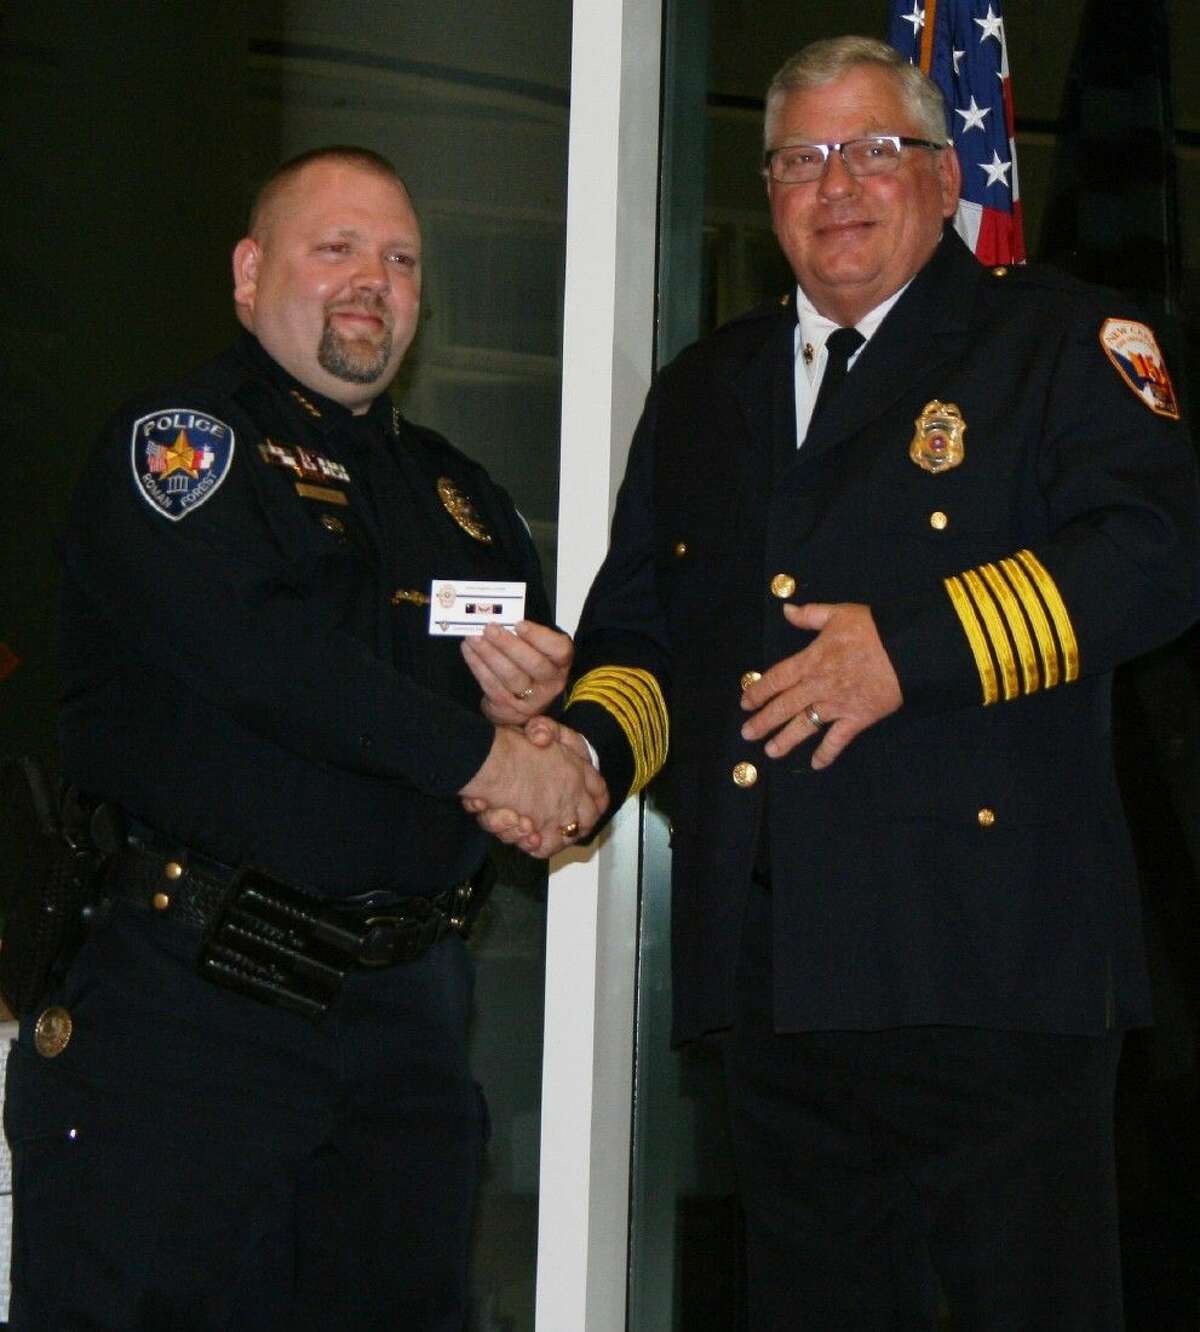 New Caney/Splendora Fire Chief Jeff Taylor extends recognition to Roman Forest Police Chief Stephen Carlisle for his outstanding role in community service during the Roman Forest Law Enforcement Appreciation Dinner on March 16.